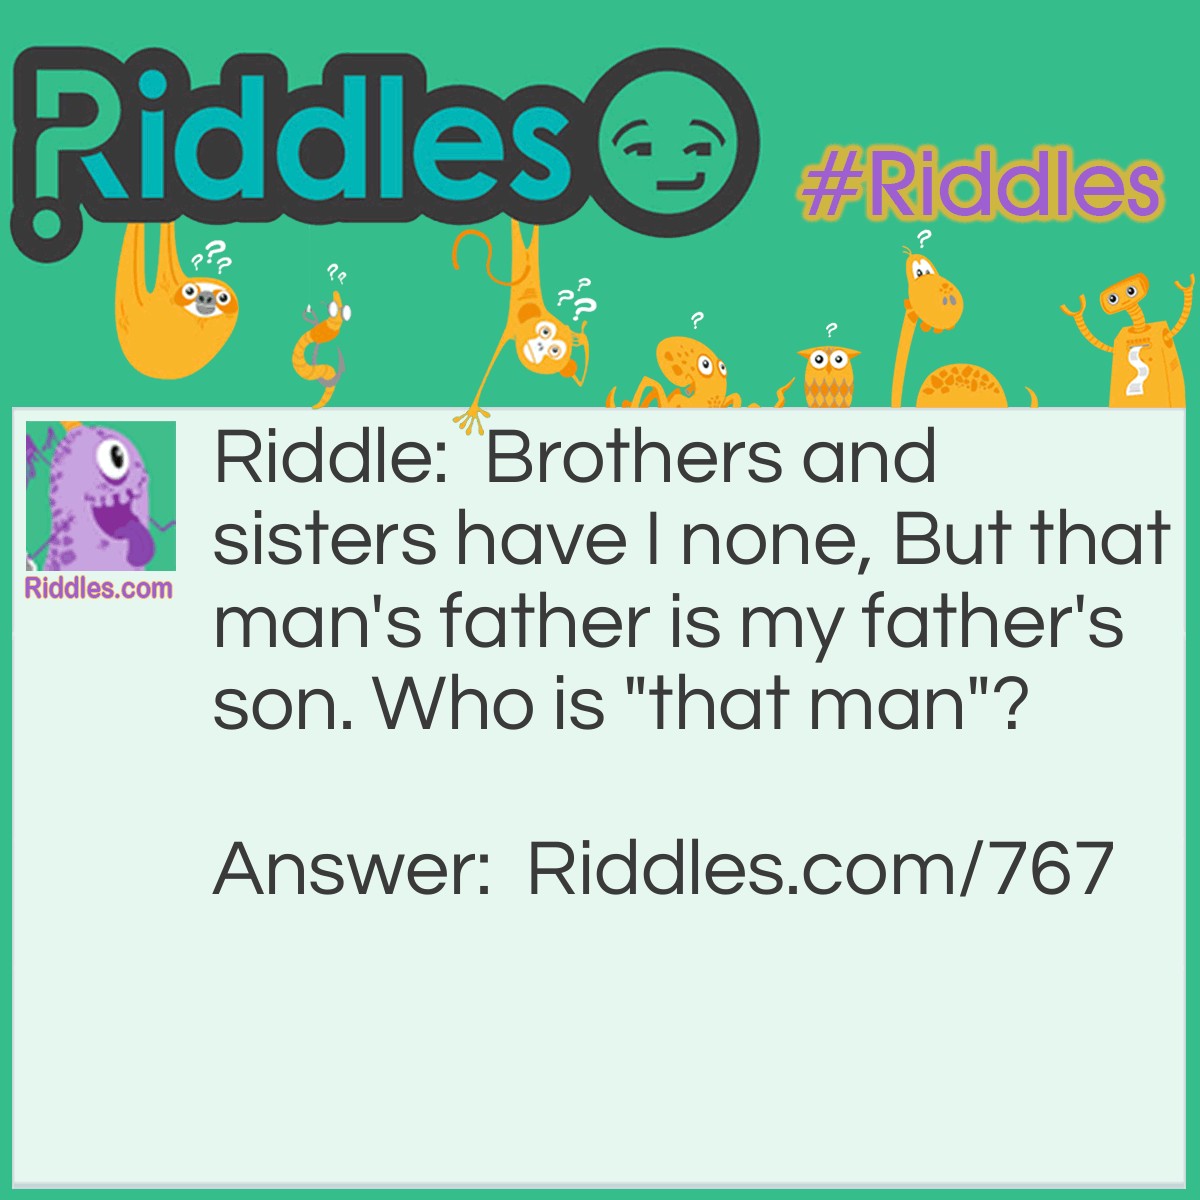 Riddle: Brothers and sisters have I none, But that man's father is my father's son. Who is "that man"? Answer: The son of the speaker.